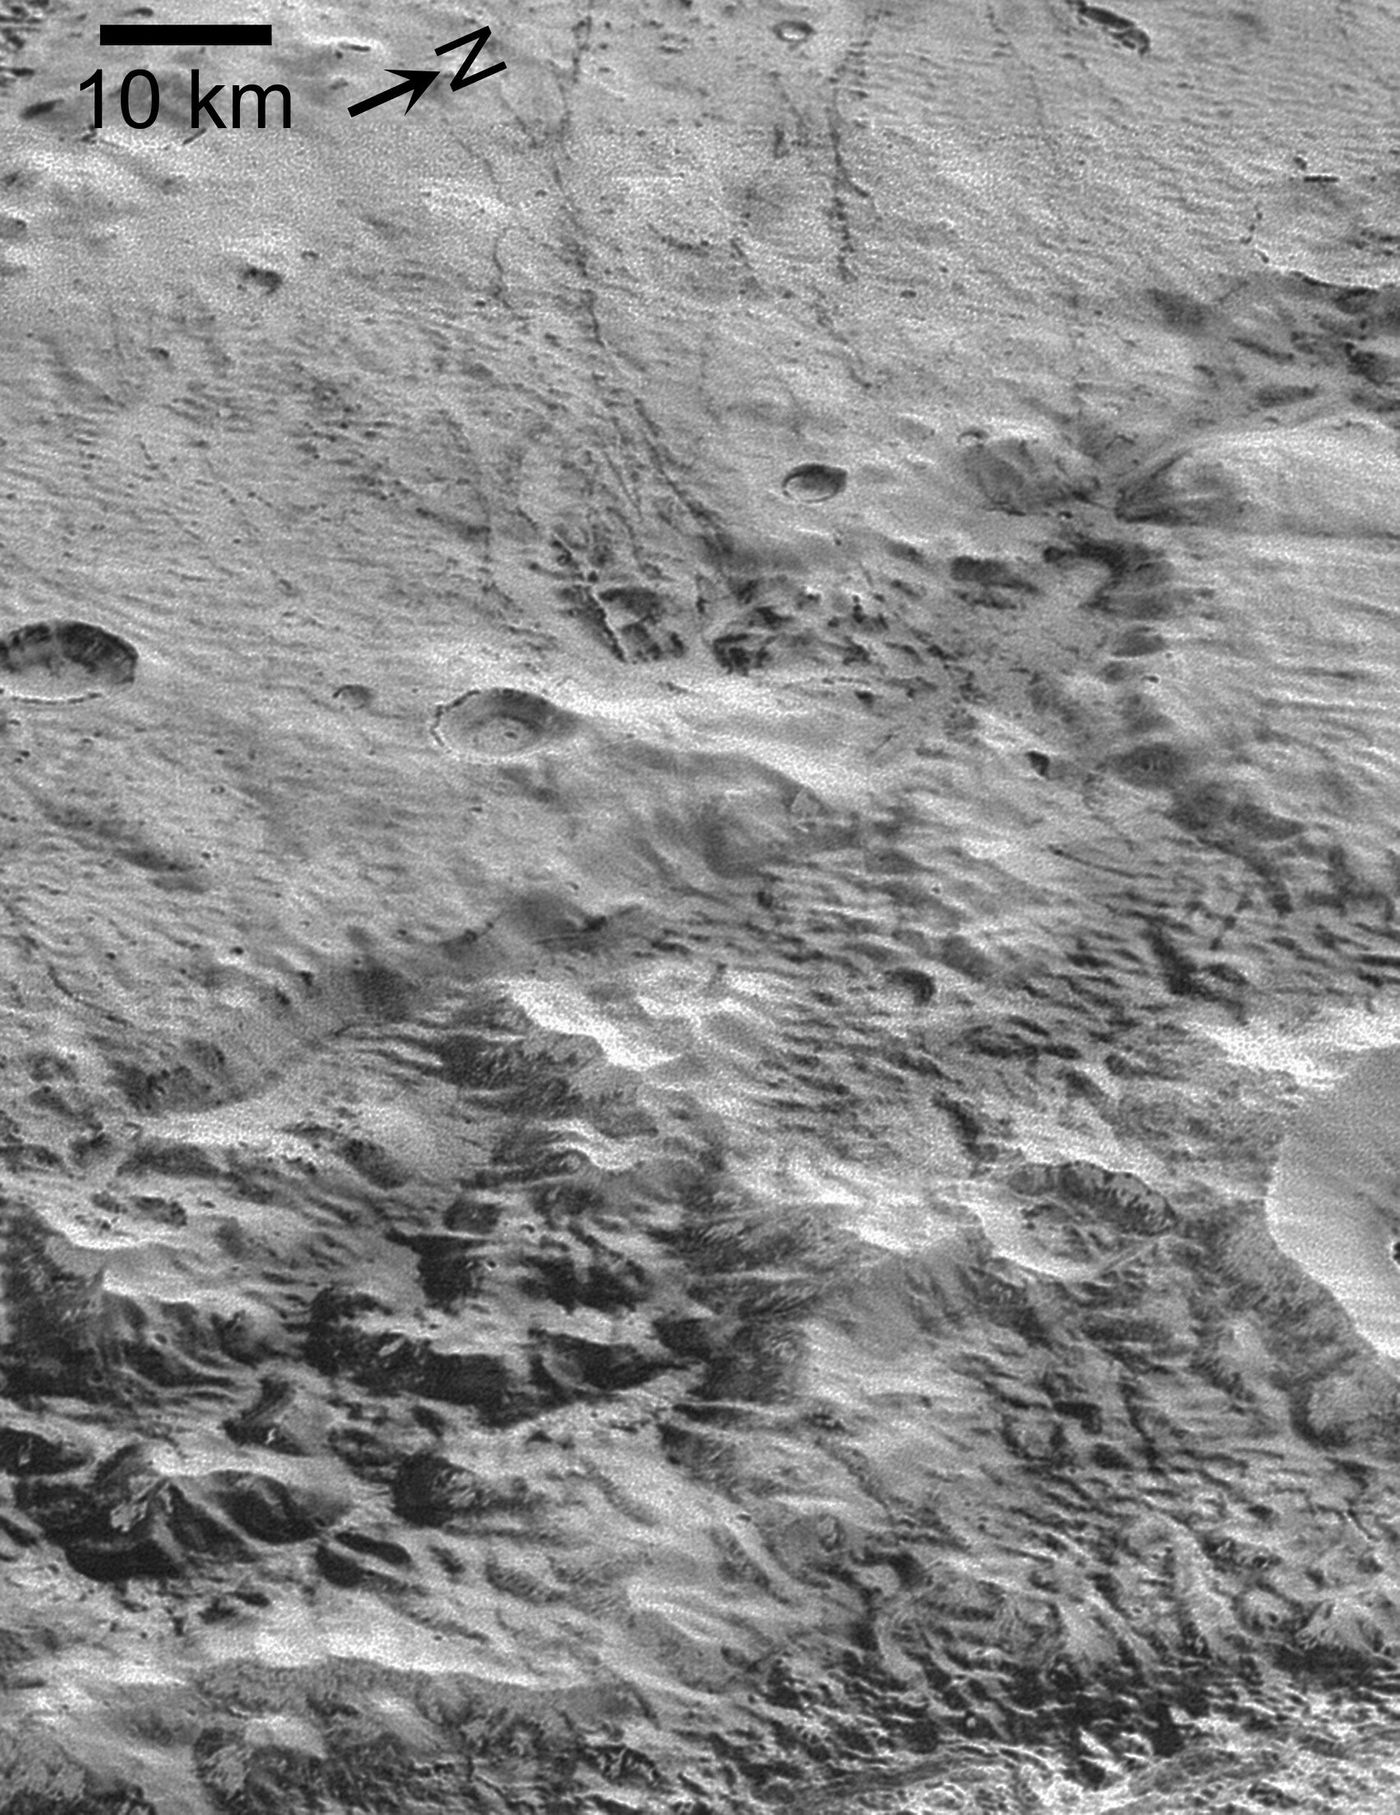 A closer look at Pluto's washboard and fluted terrain.